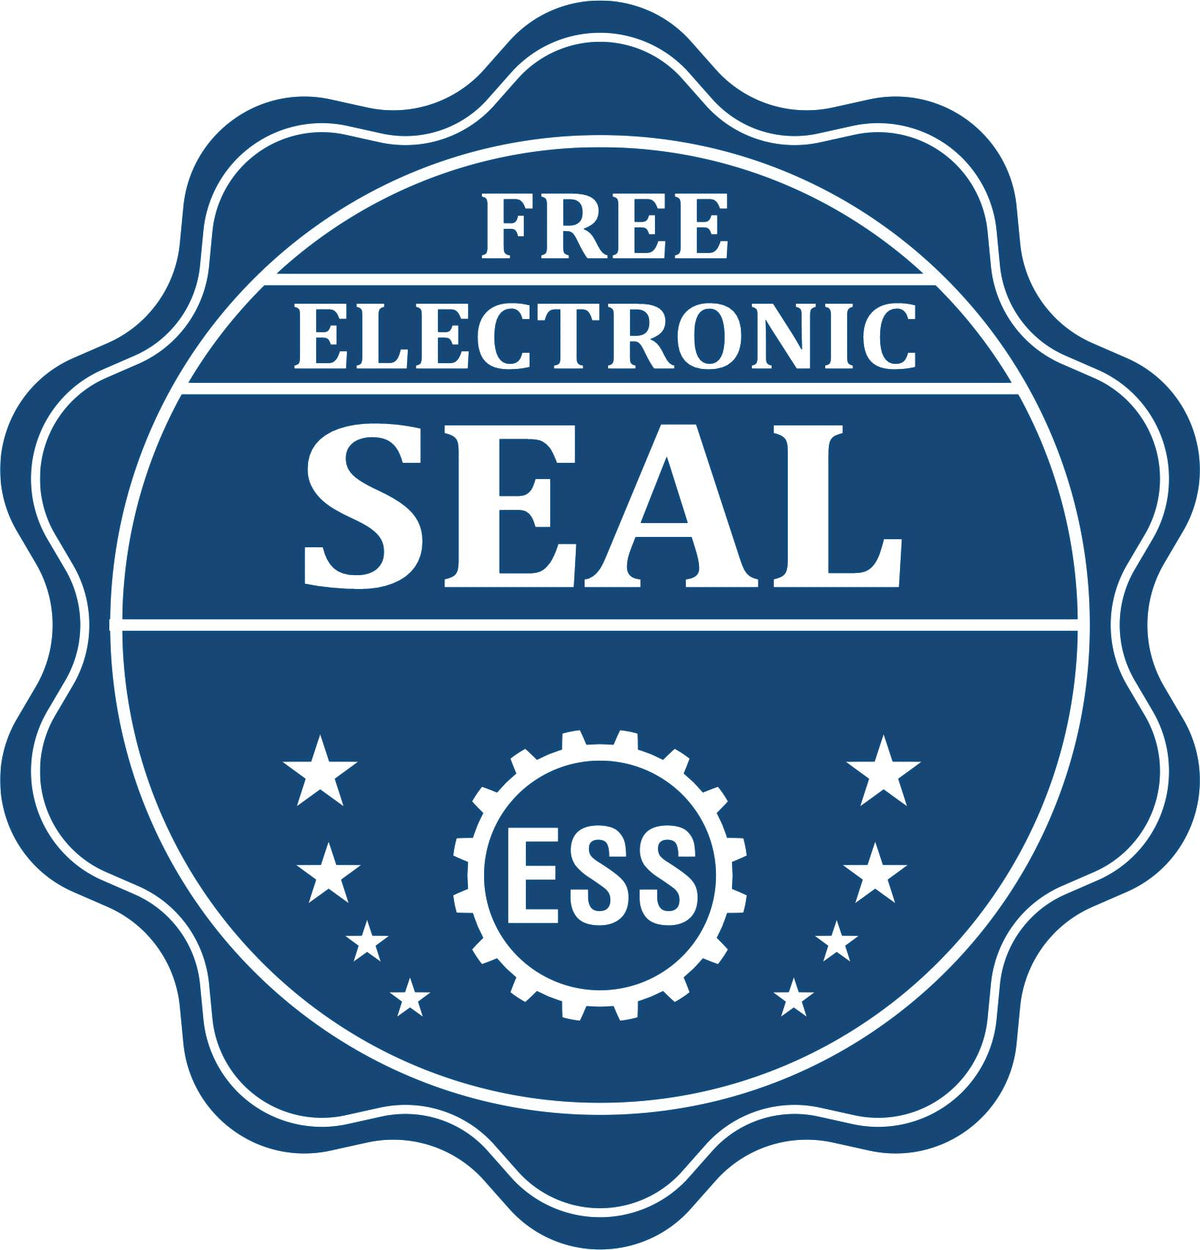 A badge showing a free electronic seal for the Alaska Geologist Desk Seal with stars and the ESS gear on the emblem.